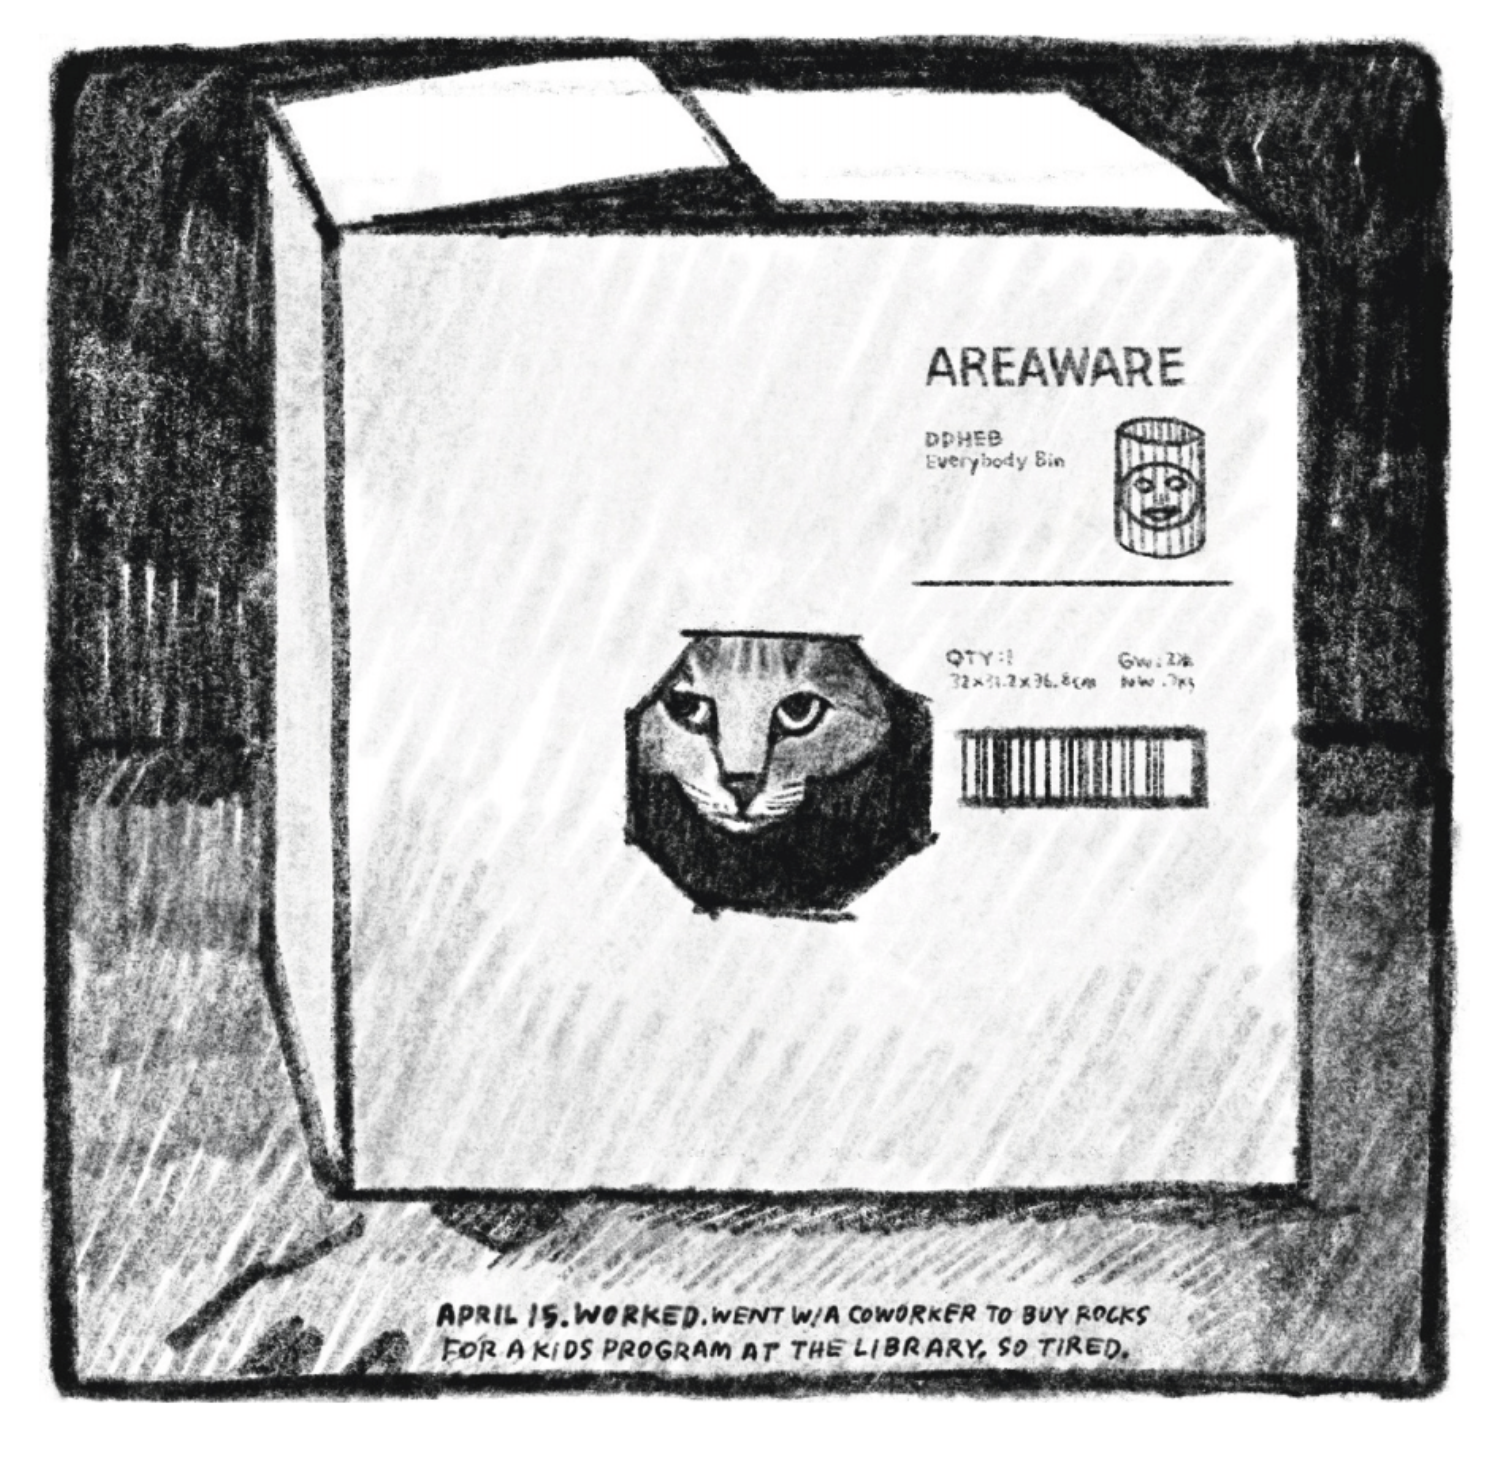 A squarish packing box, labeled "AREAWARE, Everybody Bin, Quantity 1 (etc)," has an octagonal hole cut out. Through the hole, Kim's cat looks at the viewer from inside the box. 

"April 15. Worked. Went w/ a coworker to buy rocks for a kids program at the library. So tired."